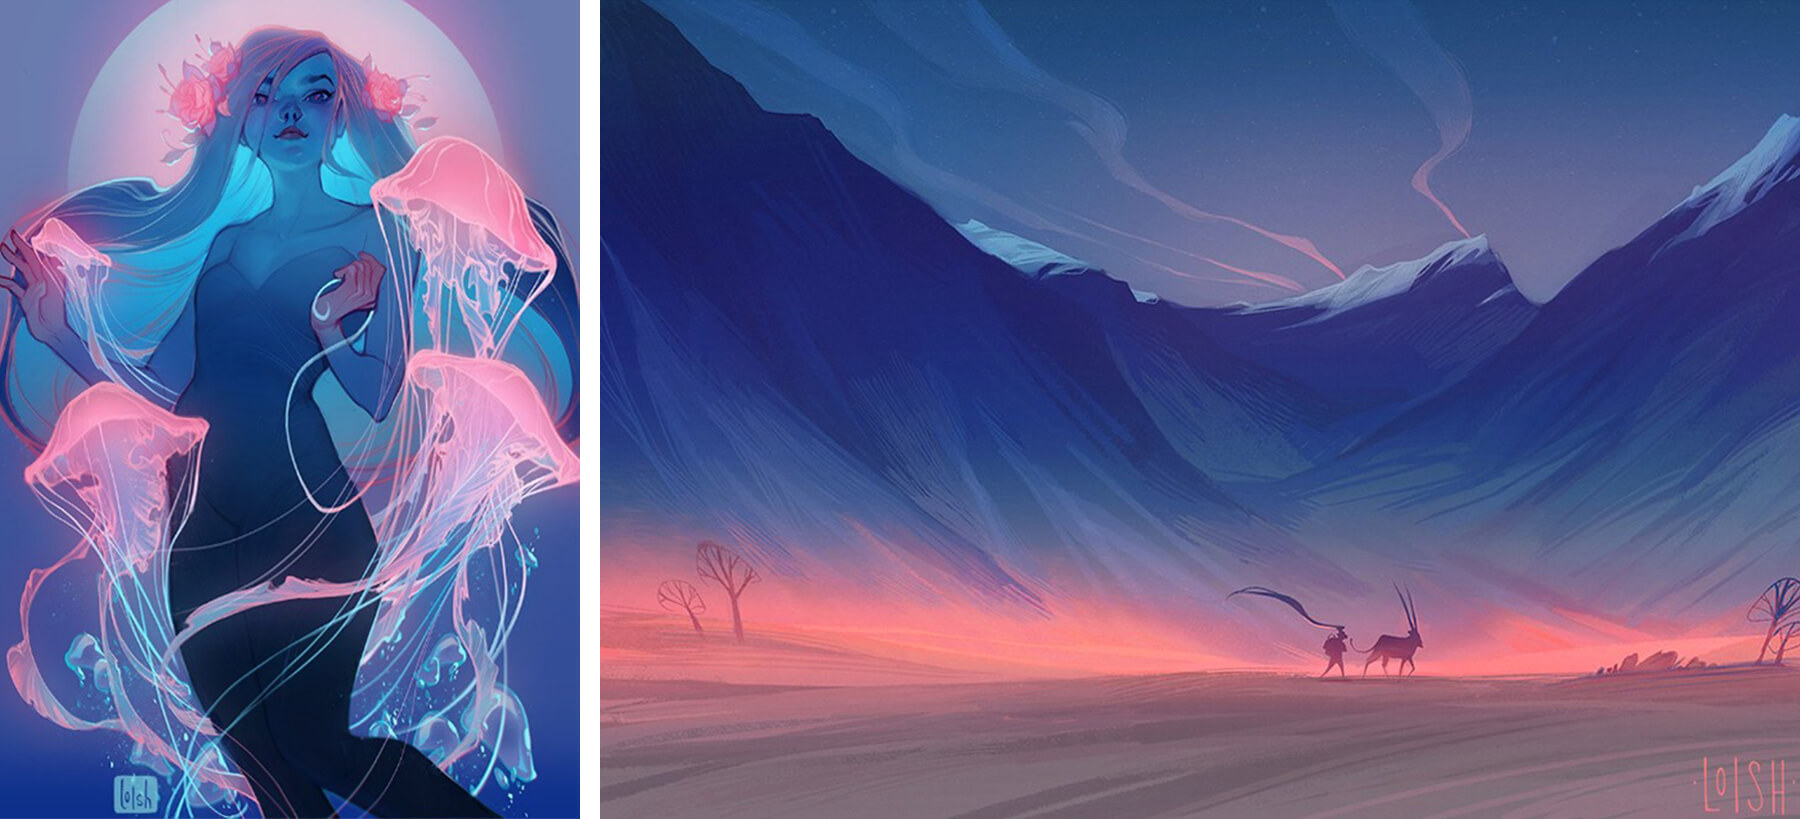 Two digital paintings of a woman with jellyfish and a pink and blue mountain landscape by Loish.